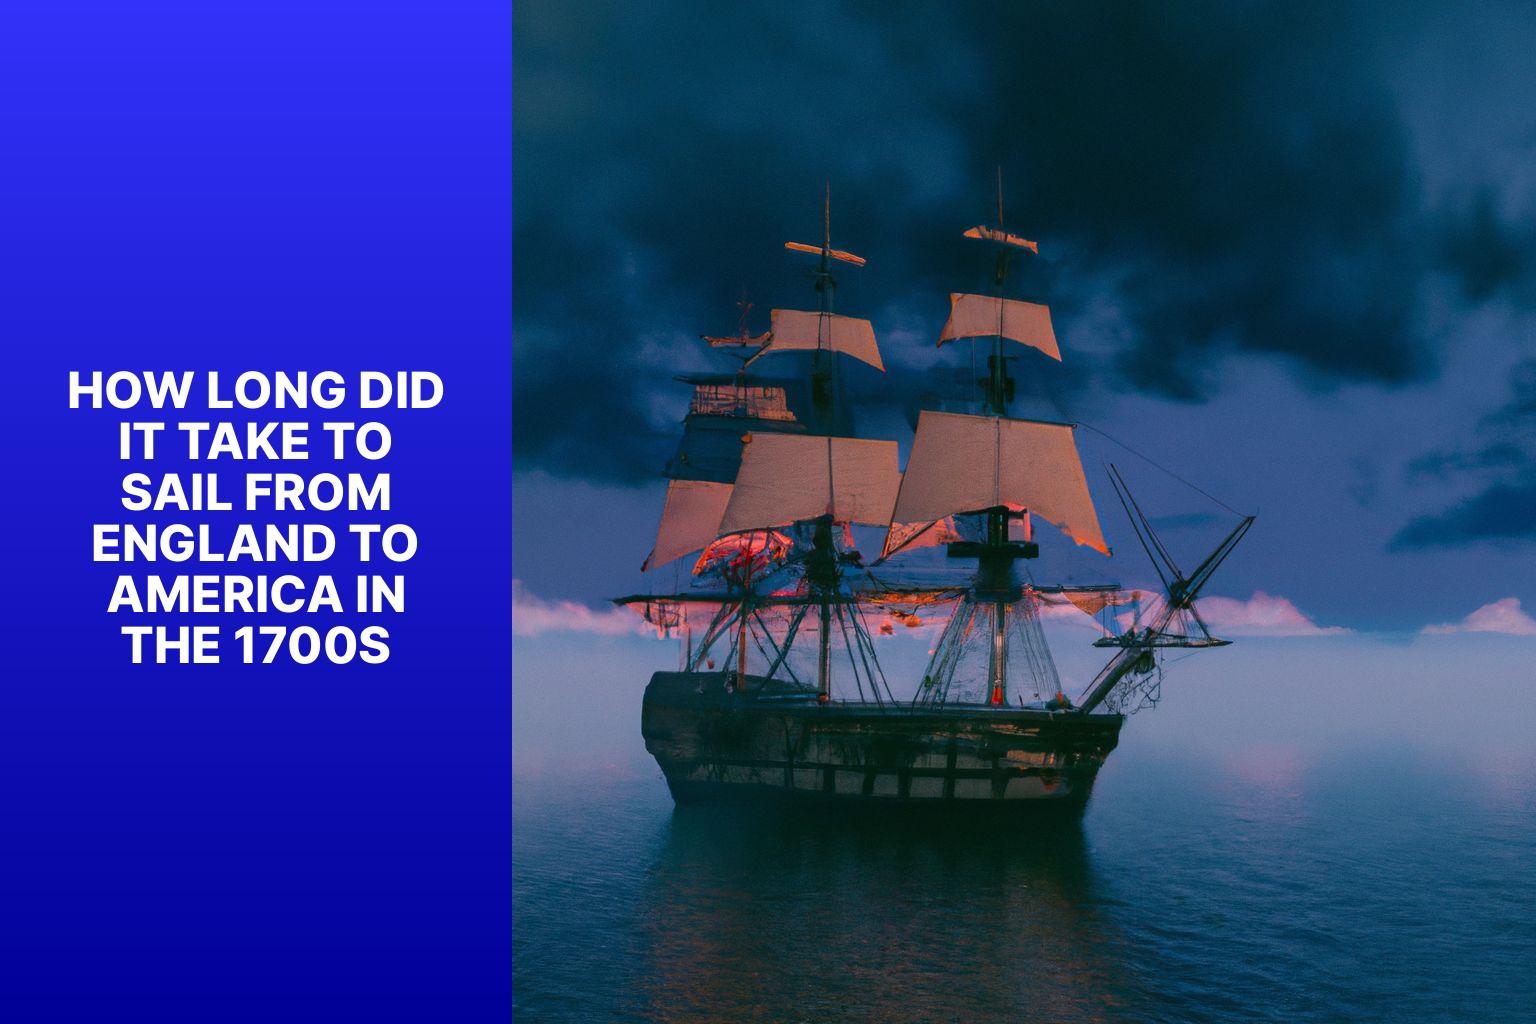 Sail from England to America in 1700s: How Long Did It Take?